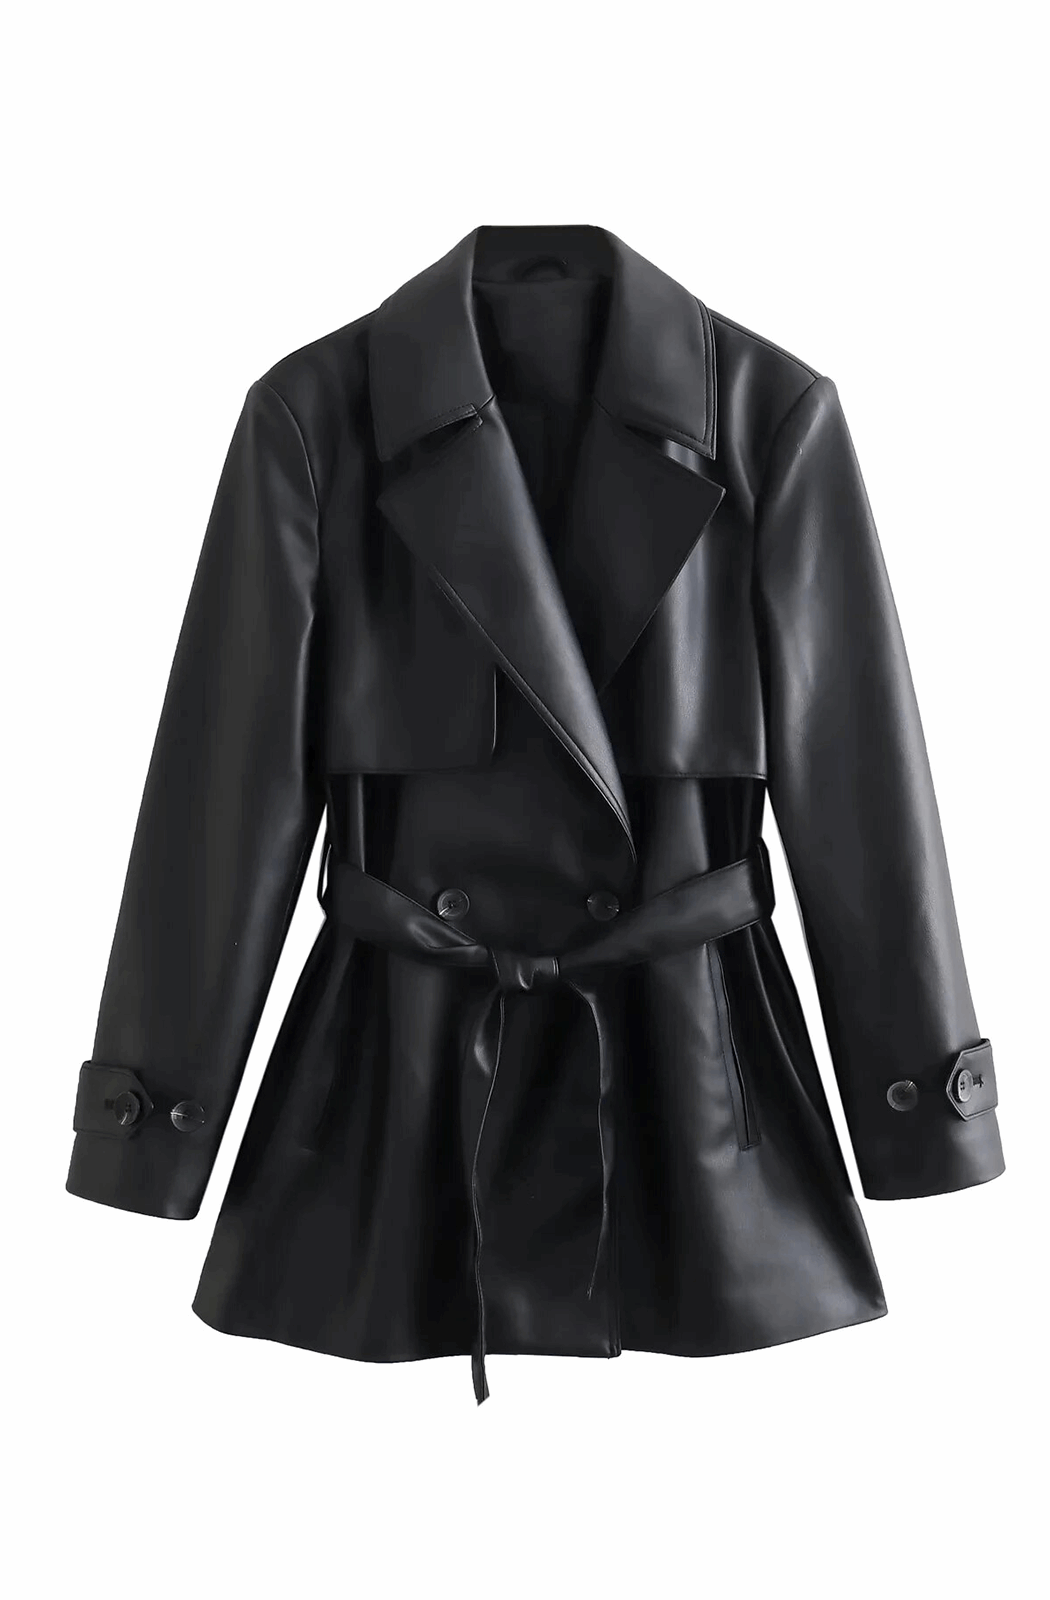 Short black leather trench coat